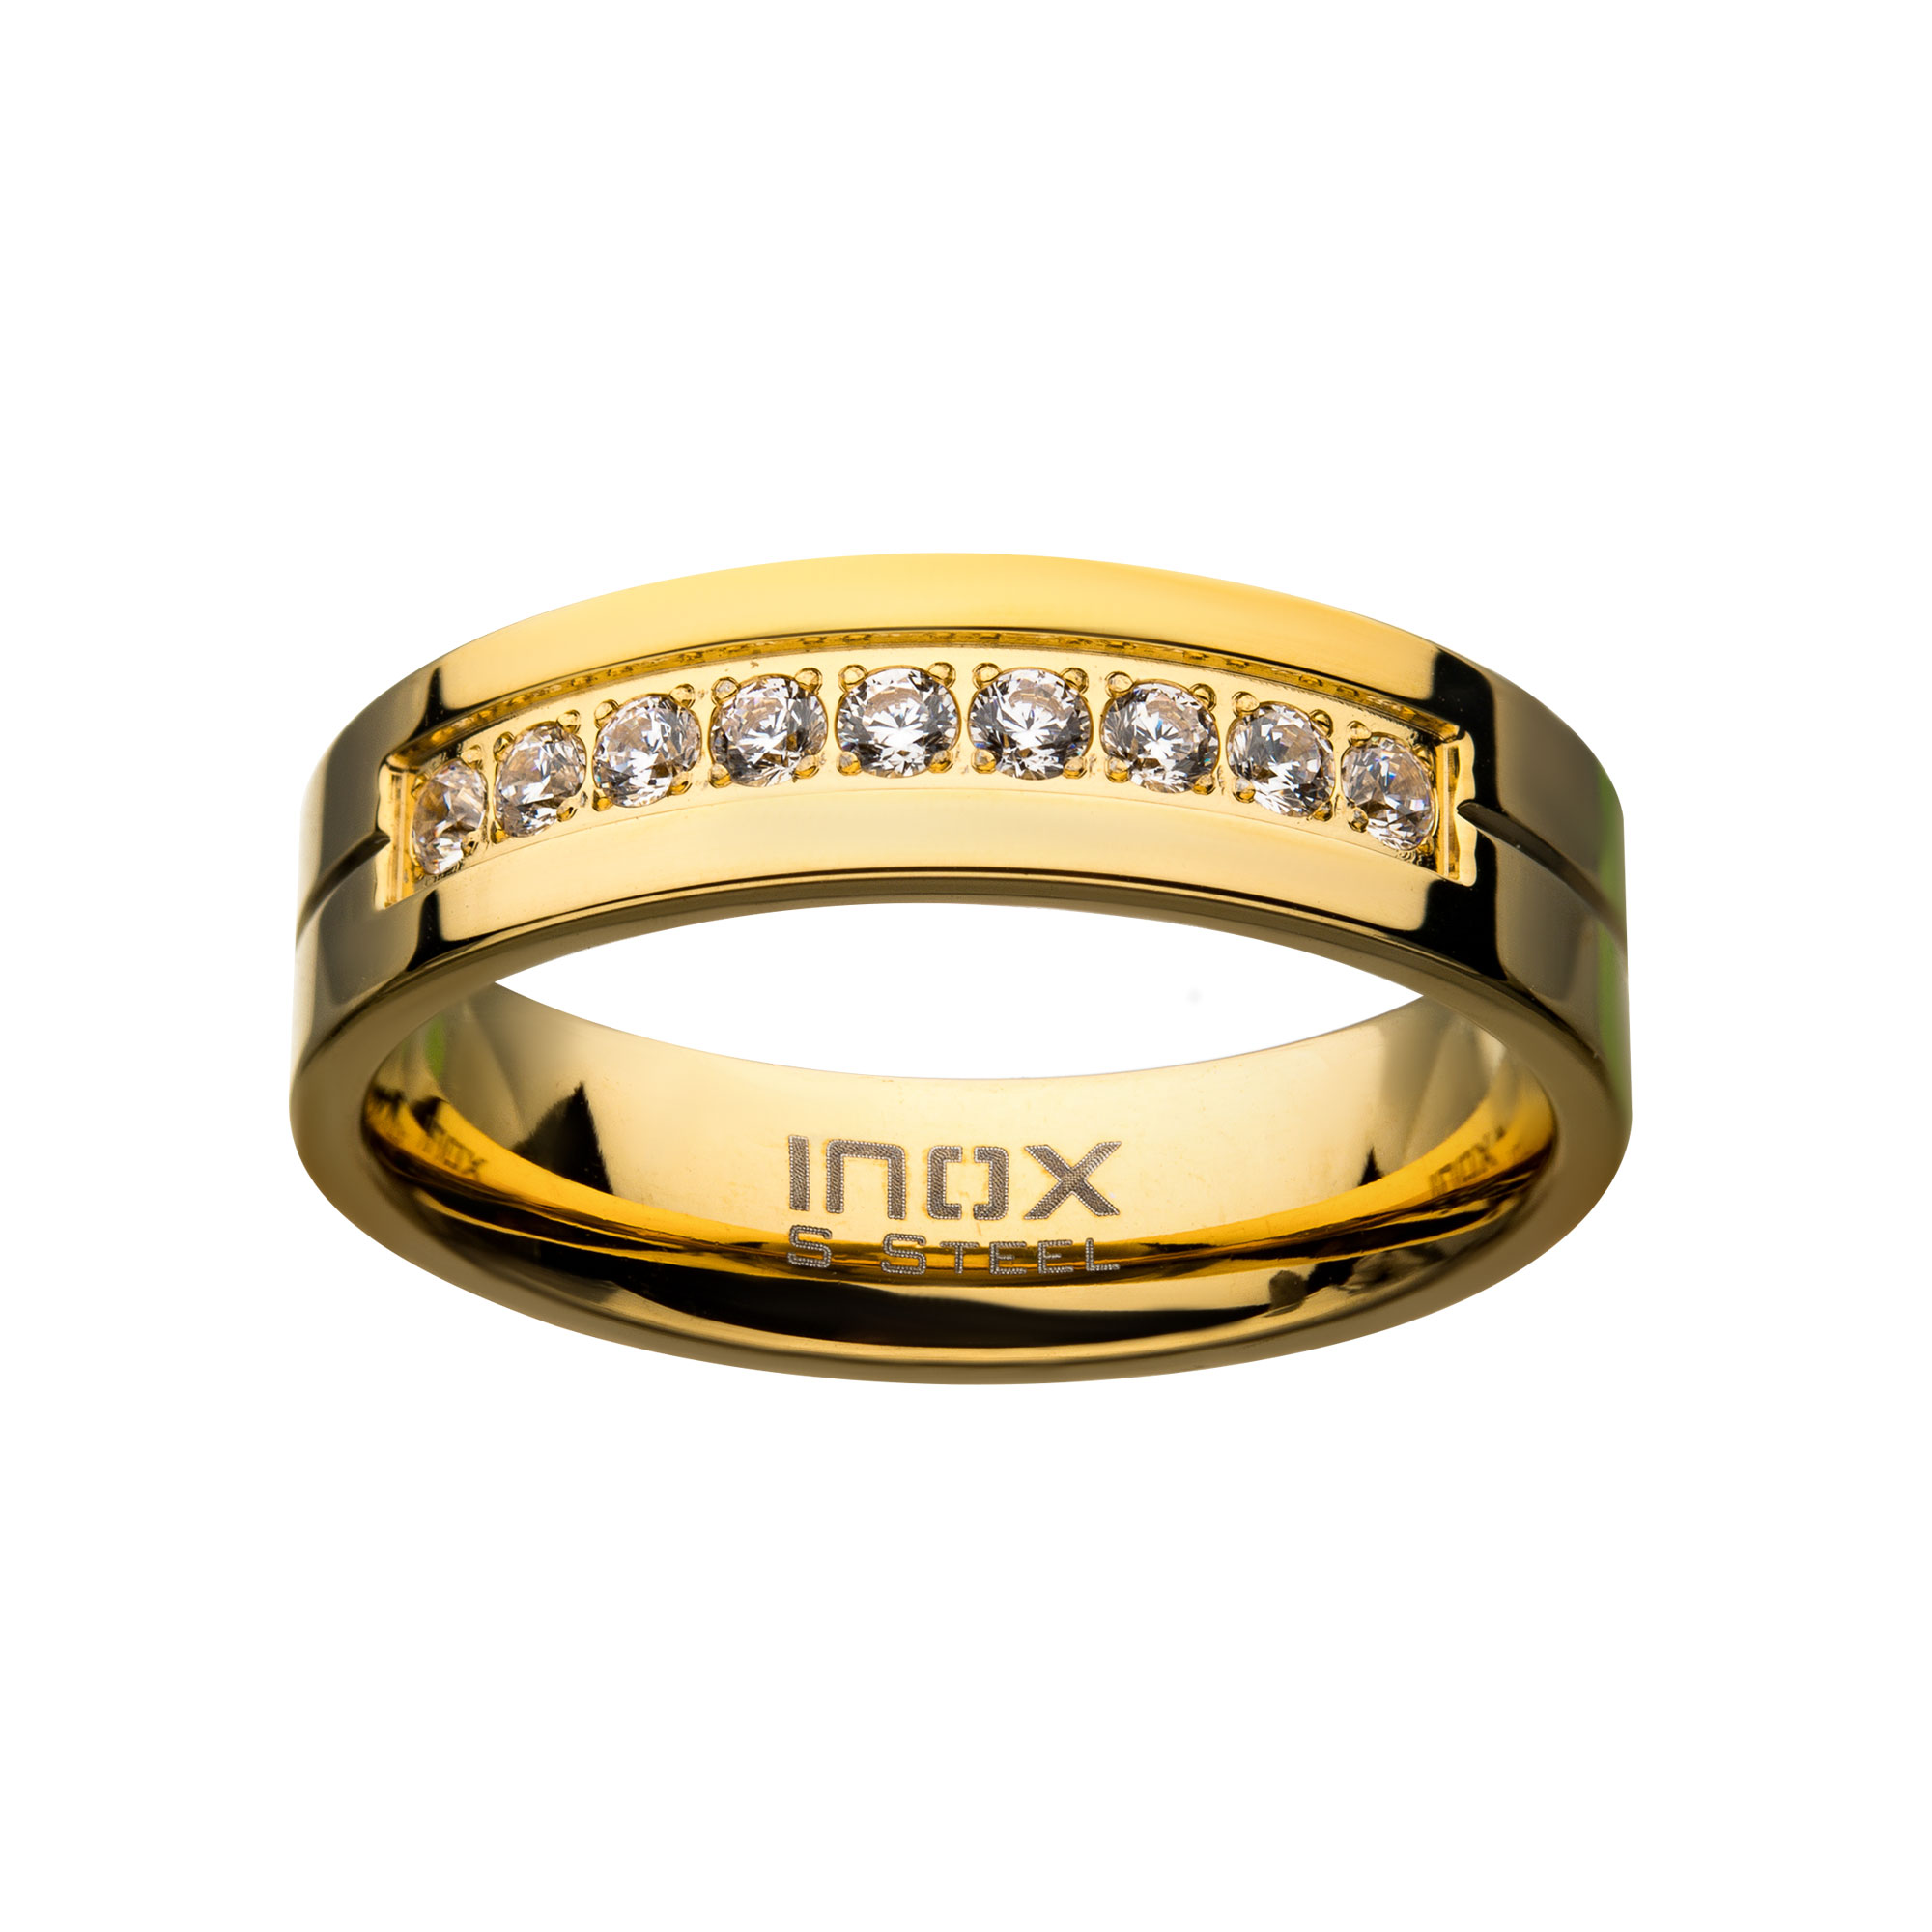 Gold PVD Plating Polished Steel ComfortFit Band with CZ's in Bead Channel Setting Ring Image 2 Selman's Jewelers-Gemologist McComb, MS